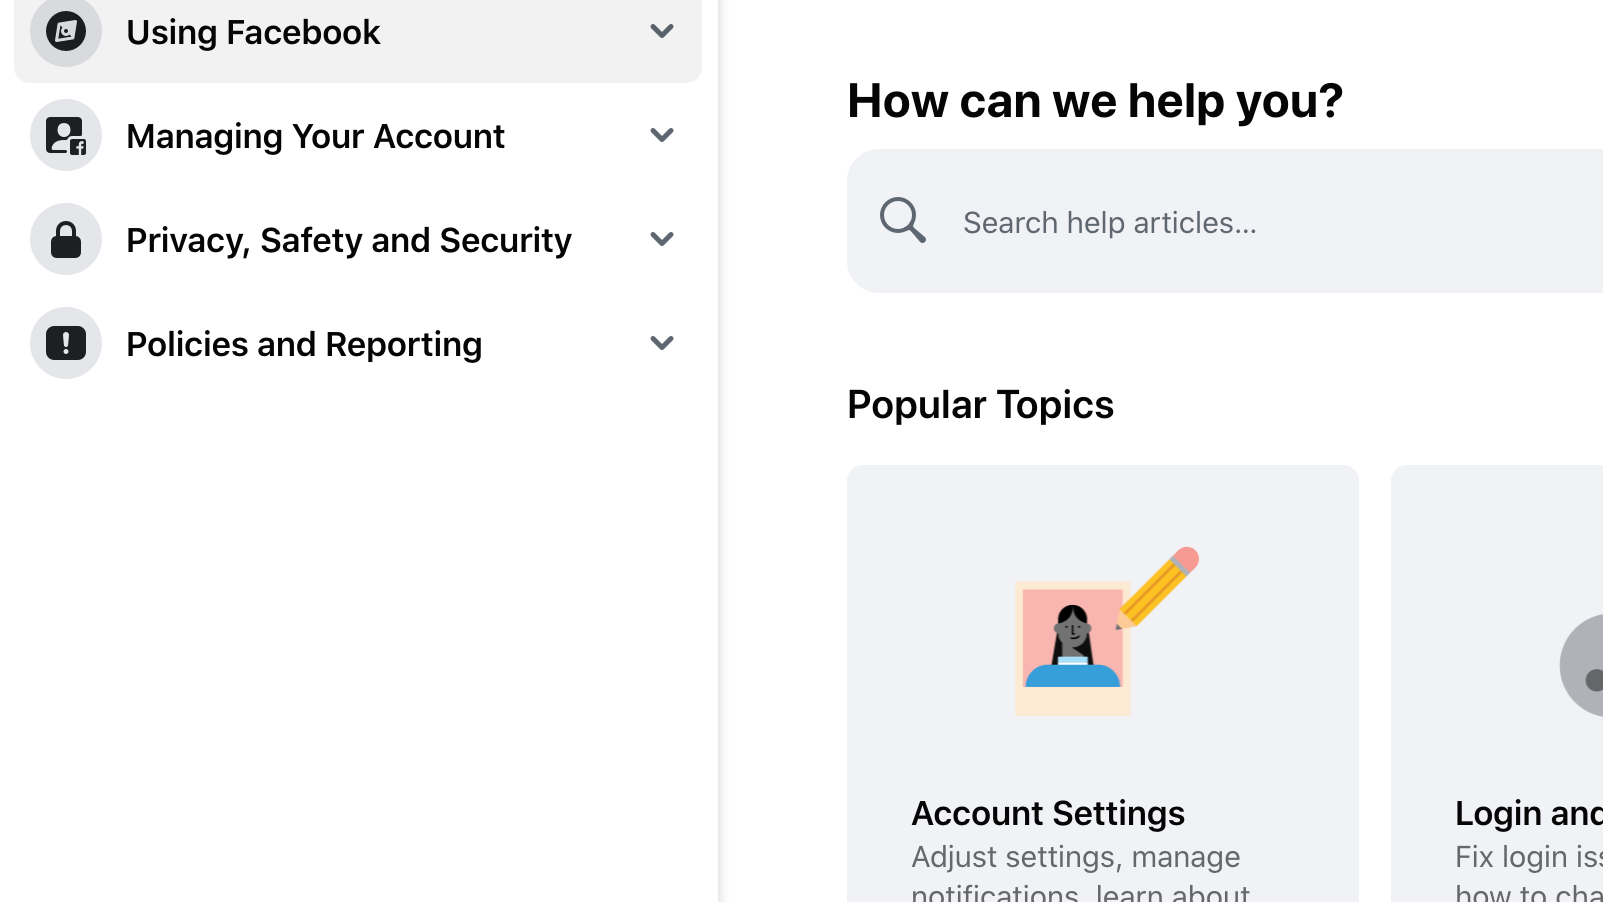 Facebook's Help Center sections